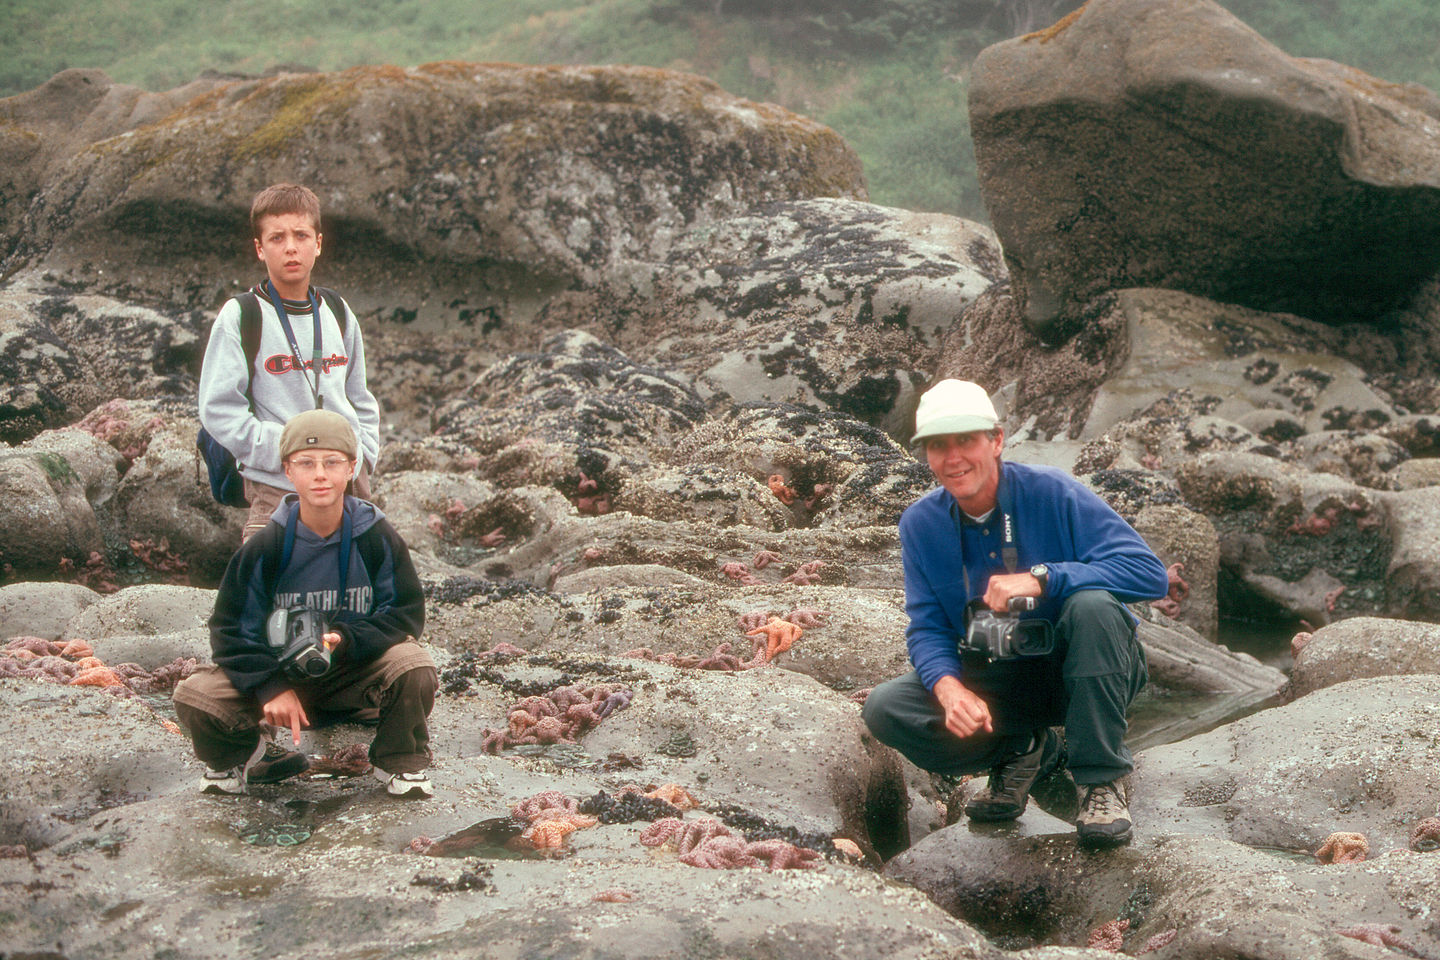 Herb and boys by tidal pools